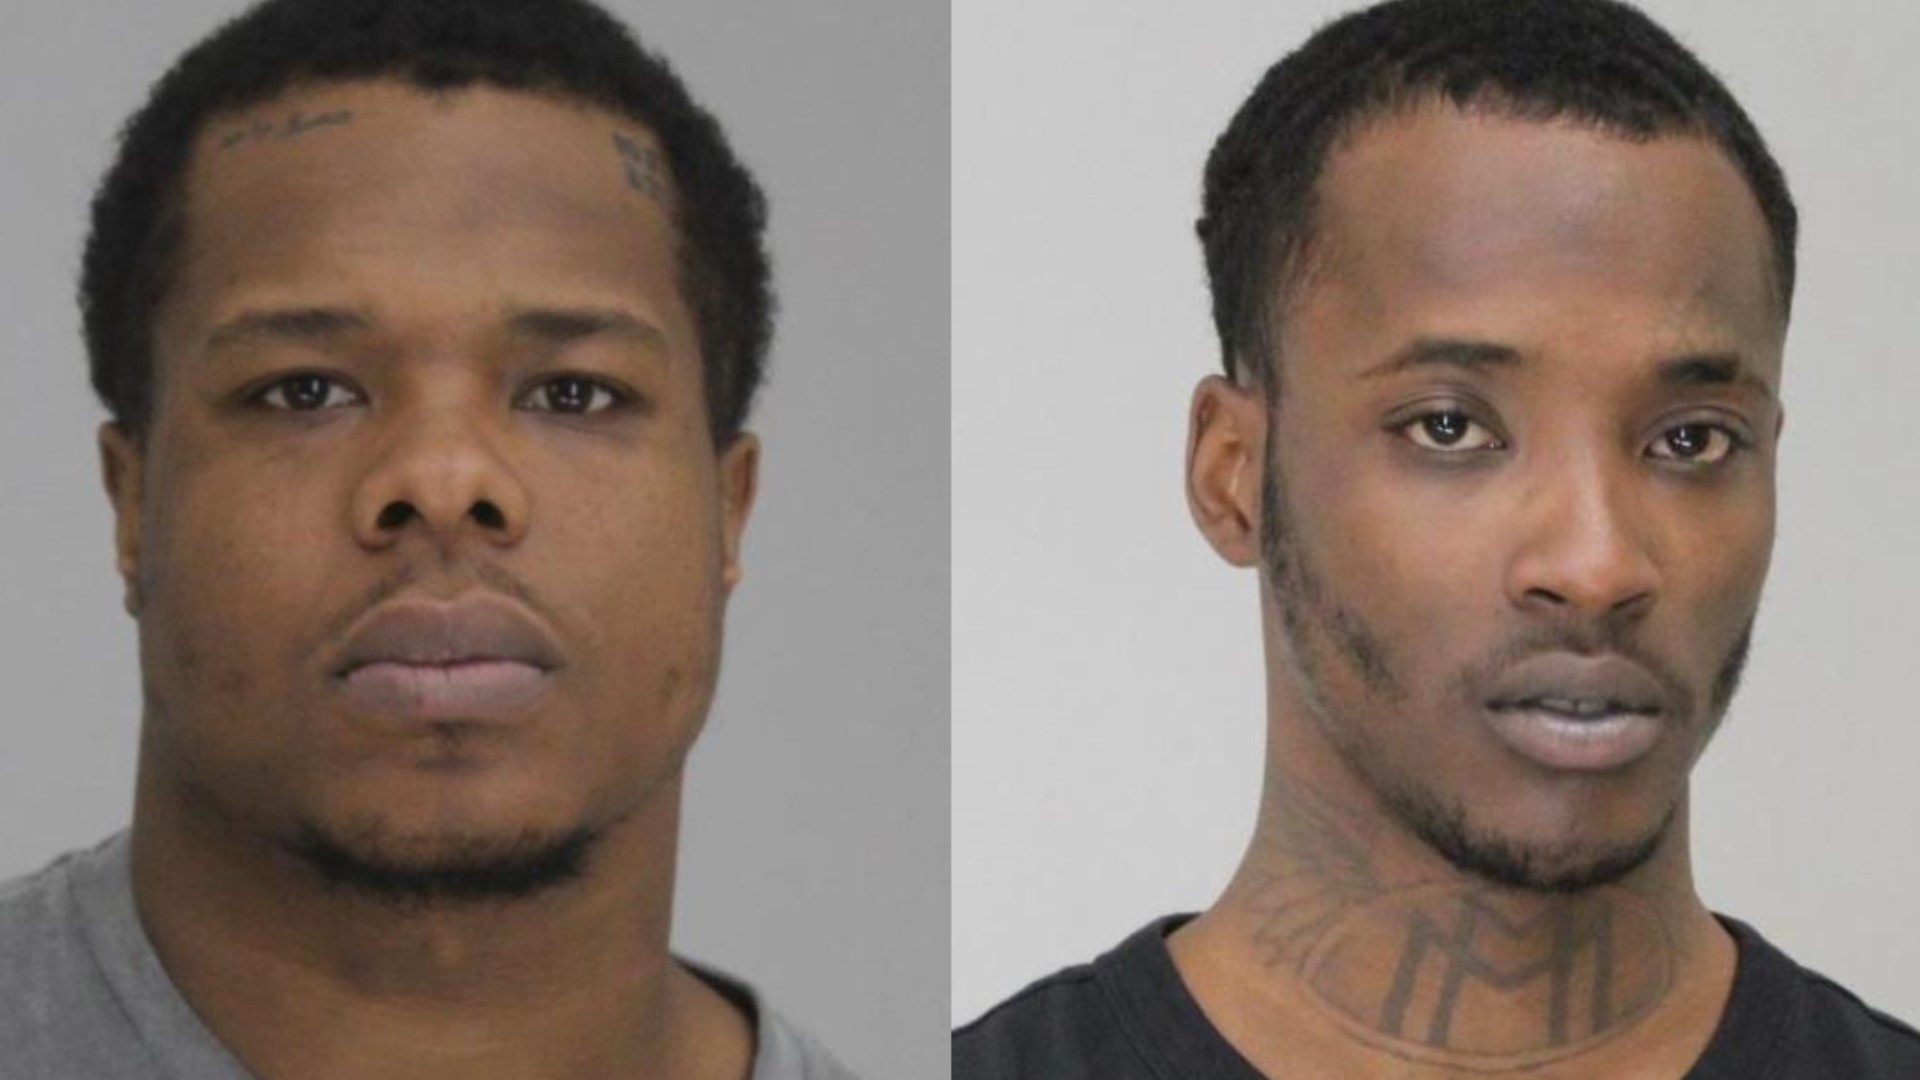 Shawn Love and Jamar Jackson were arrested after 20-year-old Anjaya Saddler and 22-year-old Decamren Sims were found dead in their apartment.